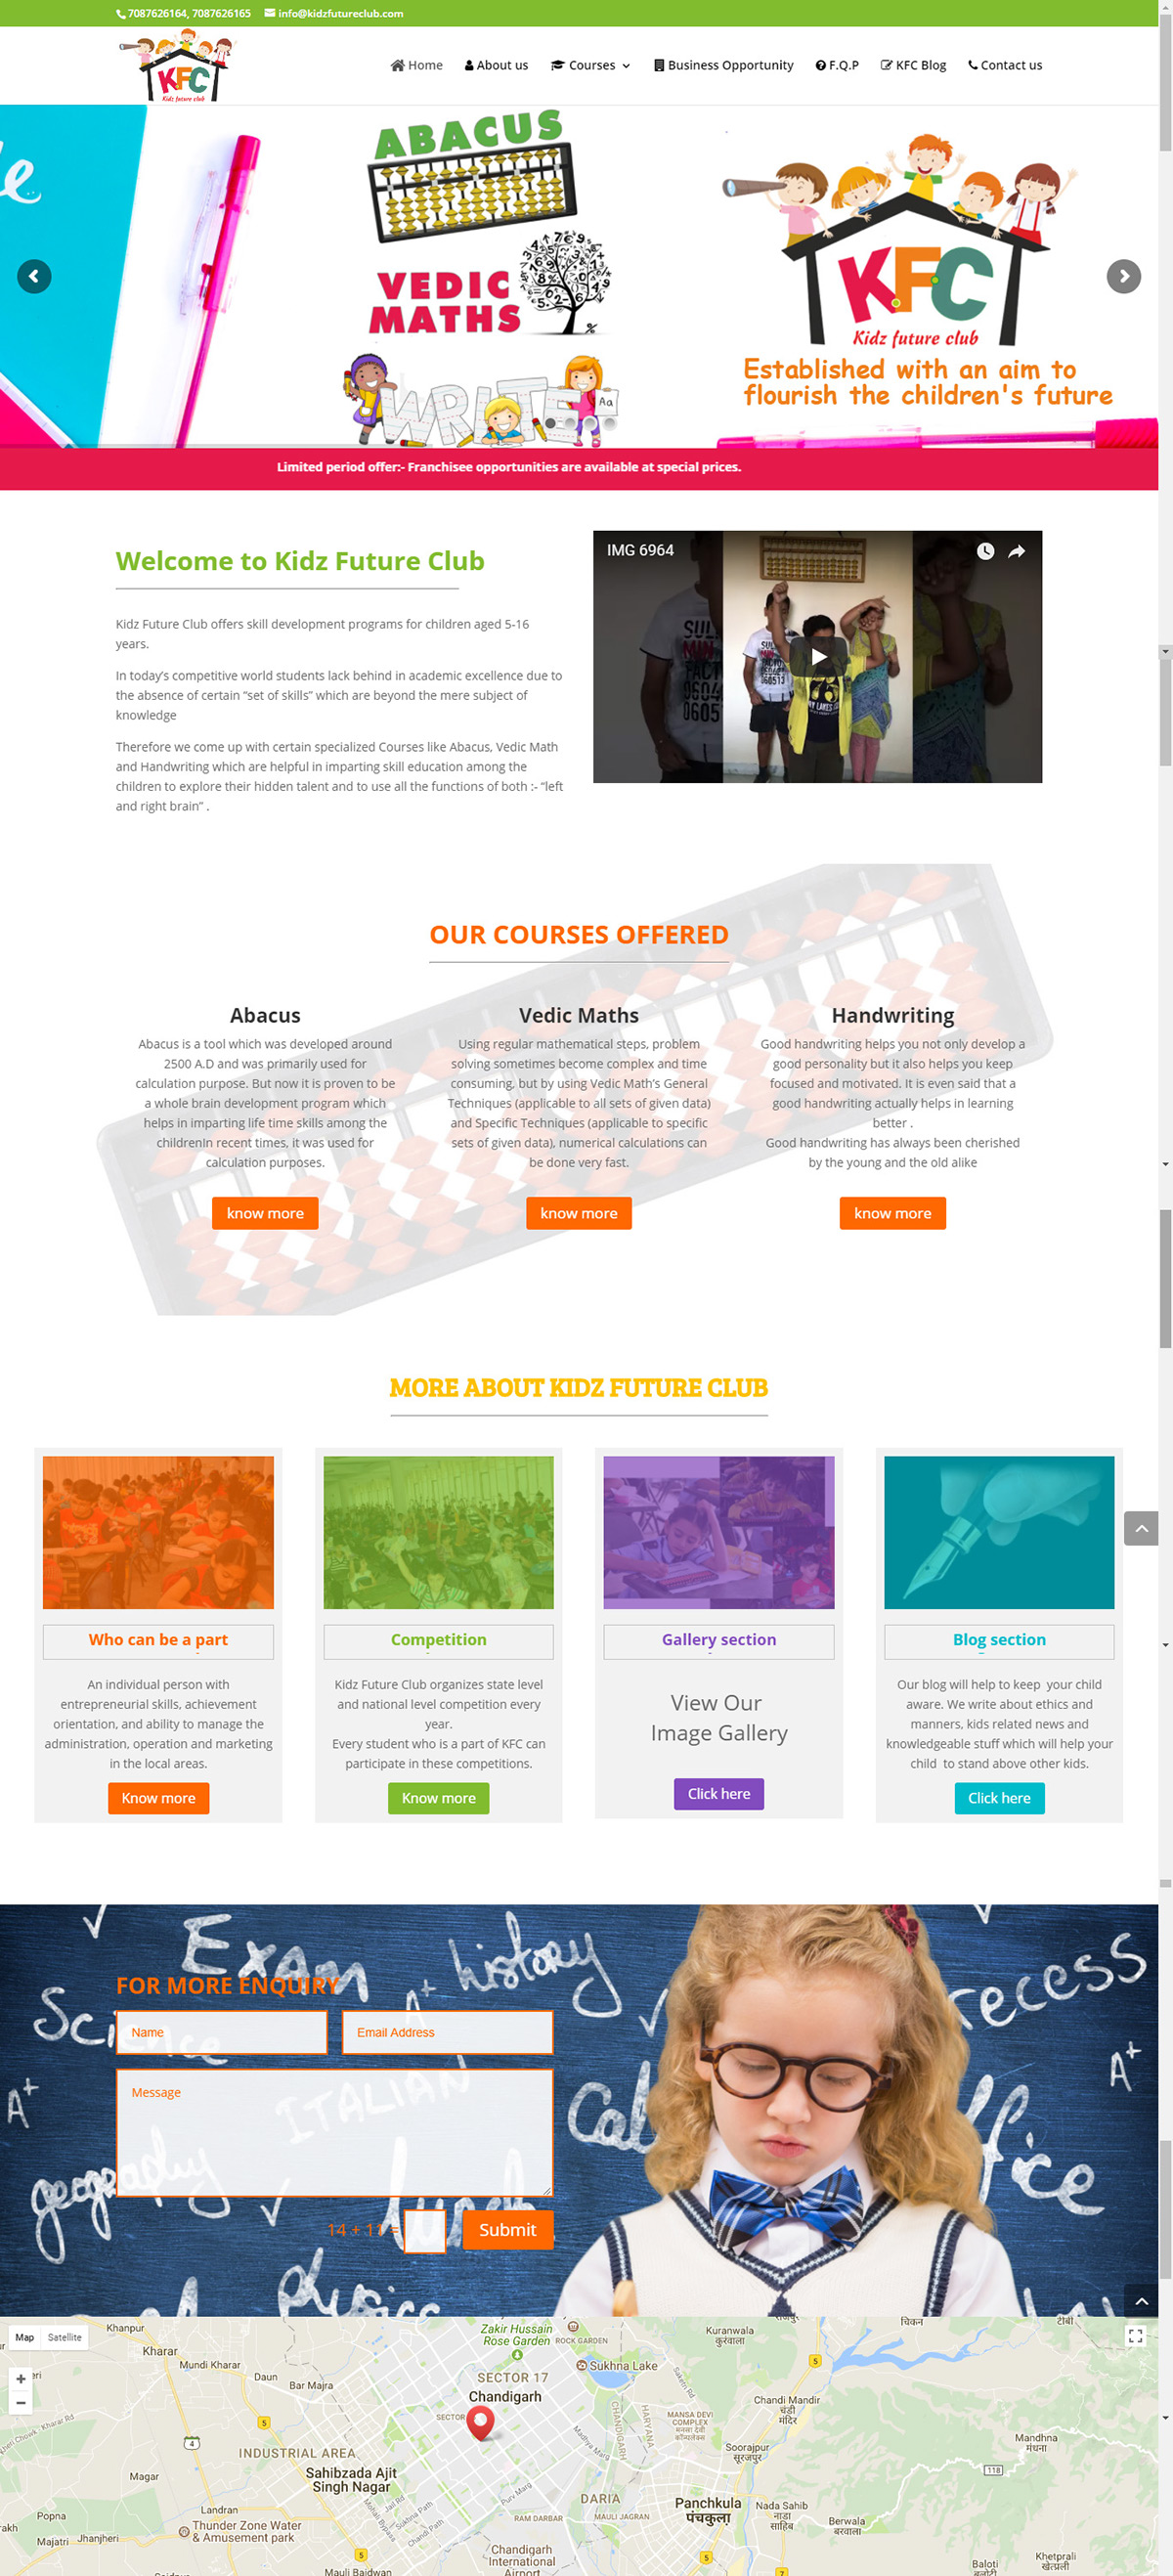 WordPress site fully designed and developed by me